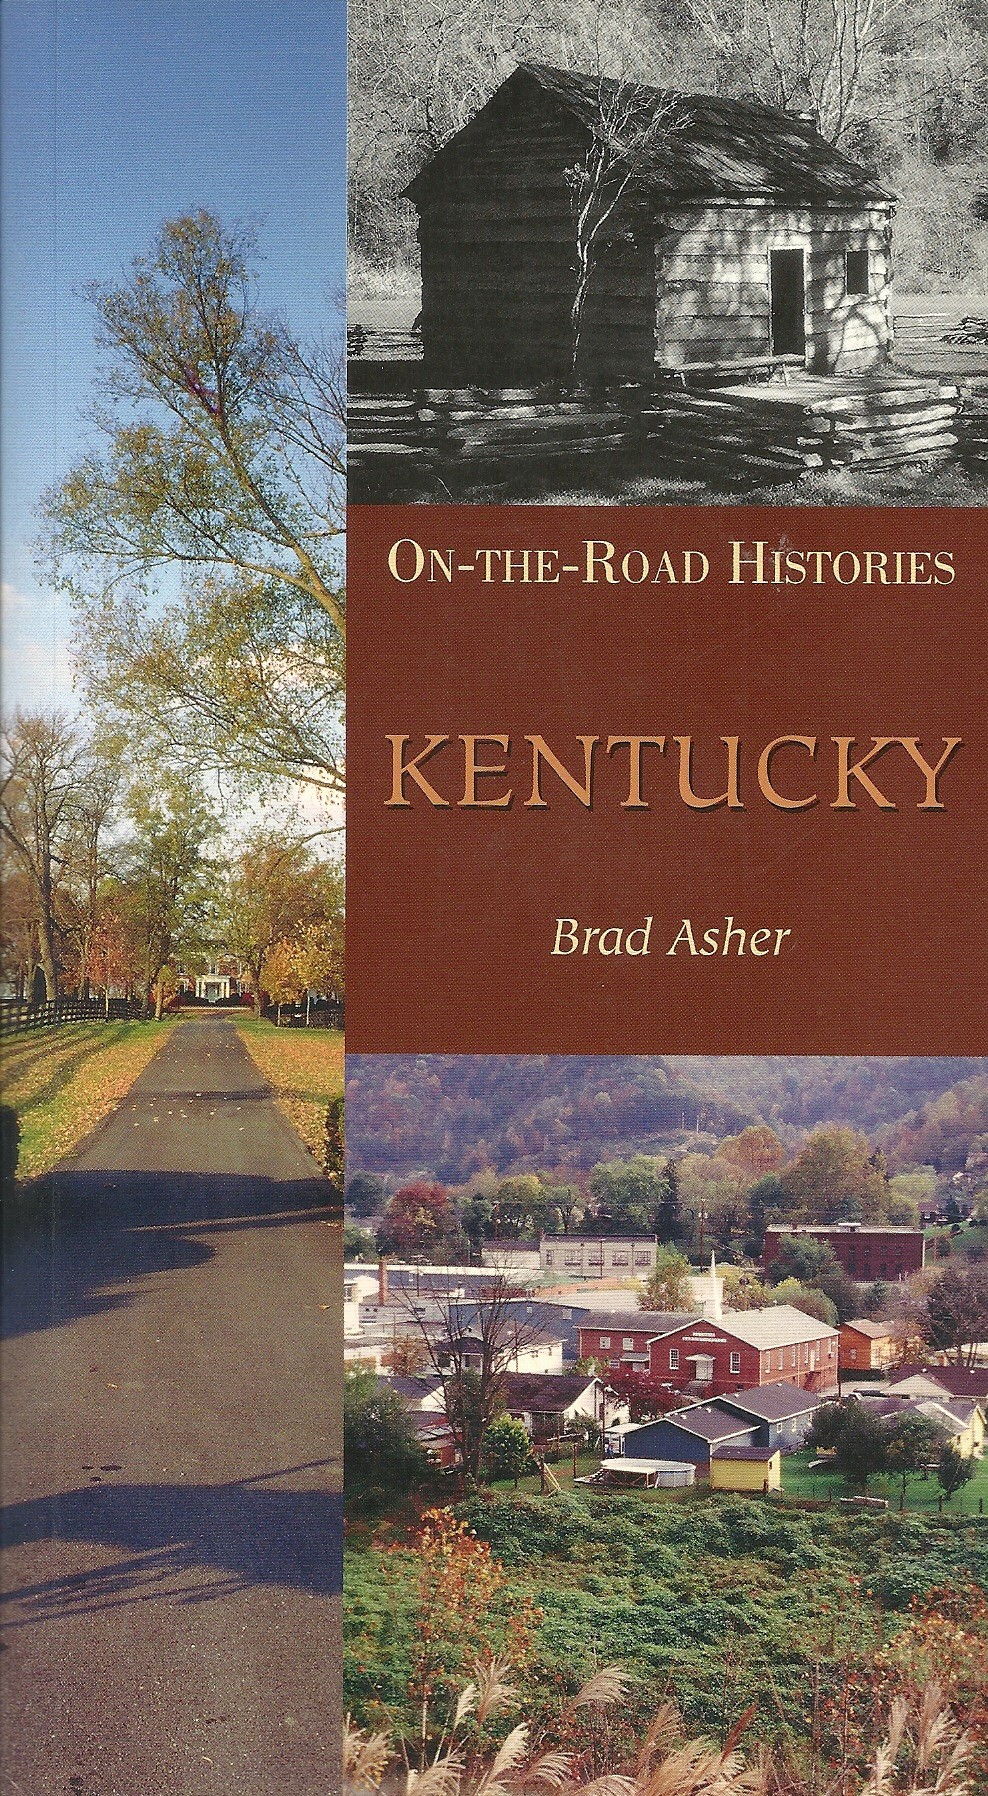 On the Road Histories Kentucky